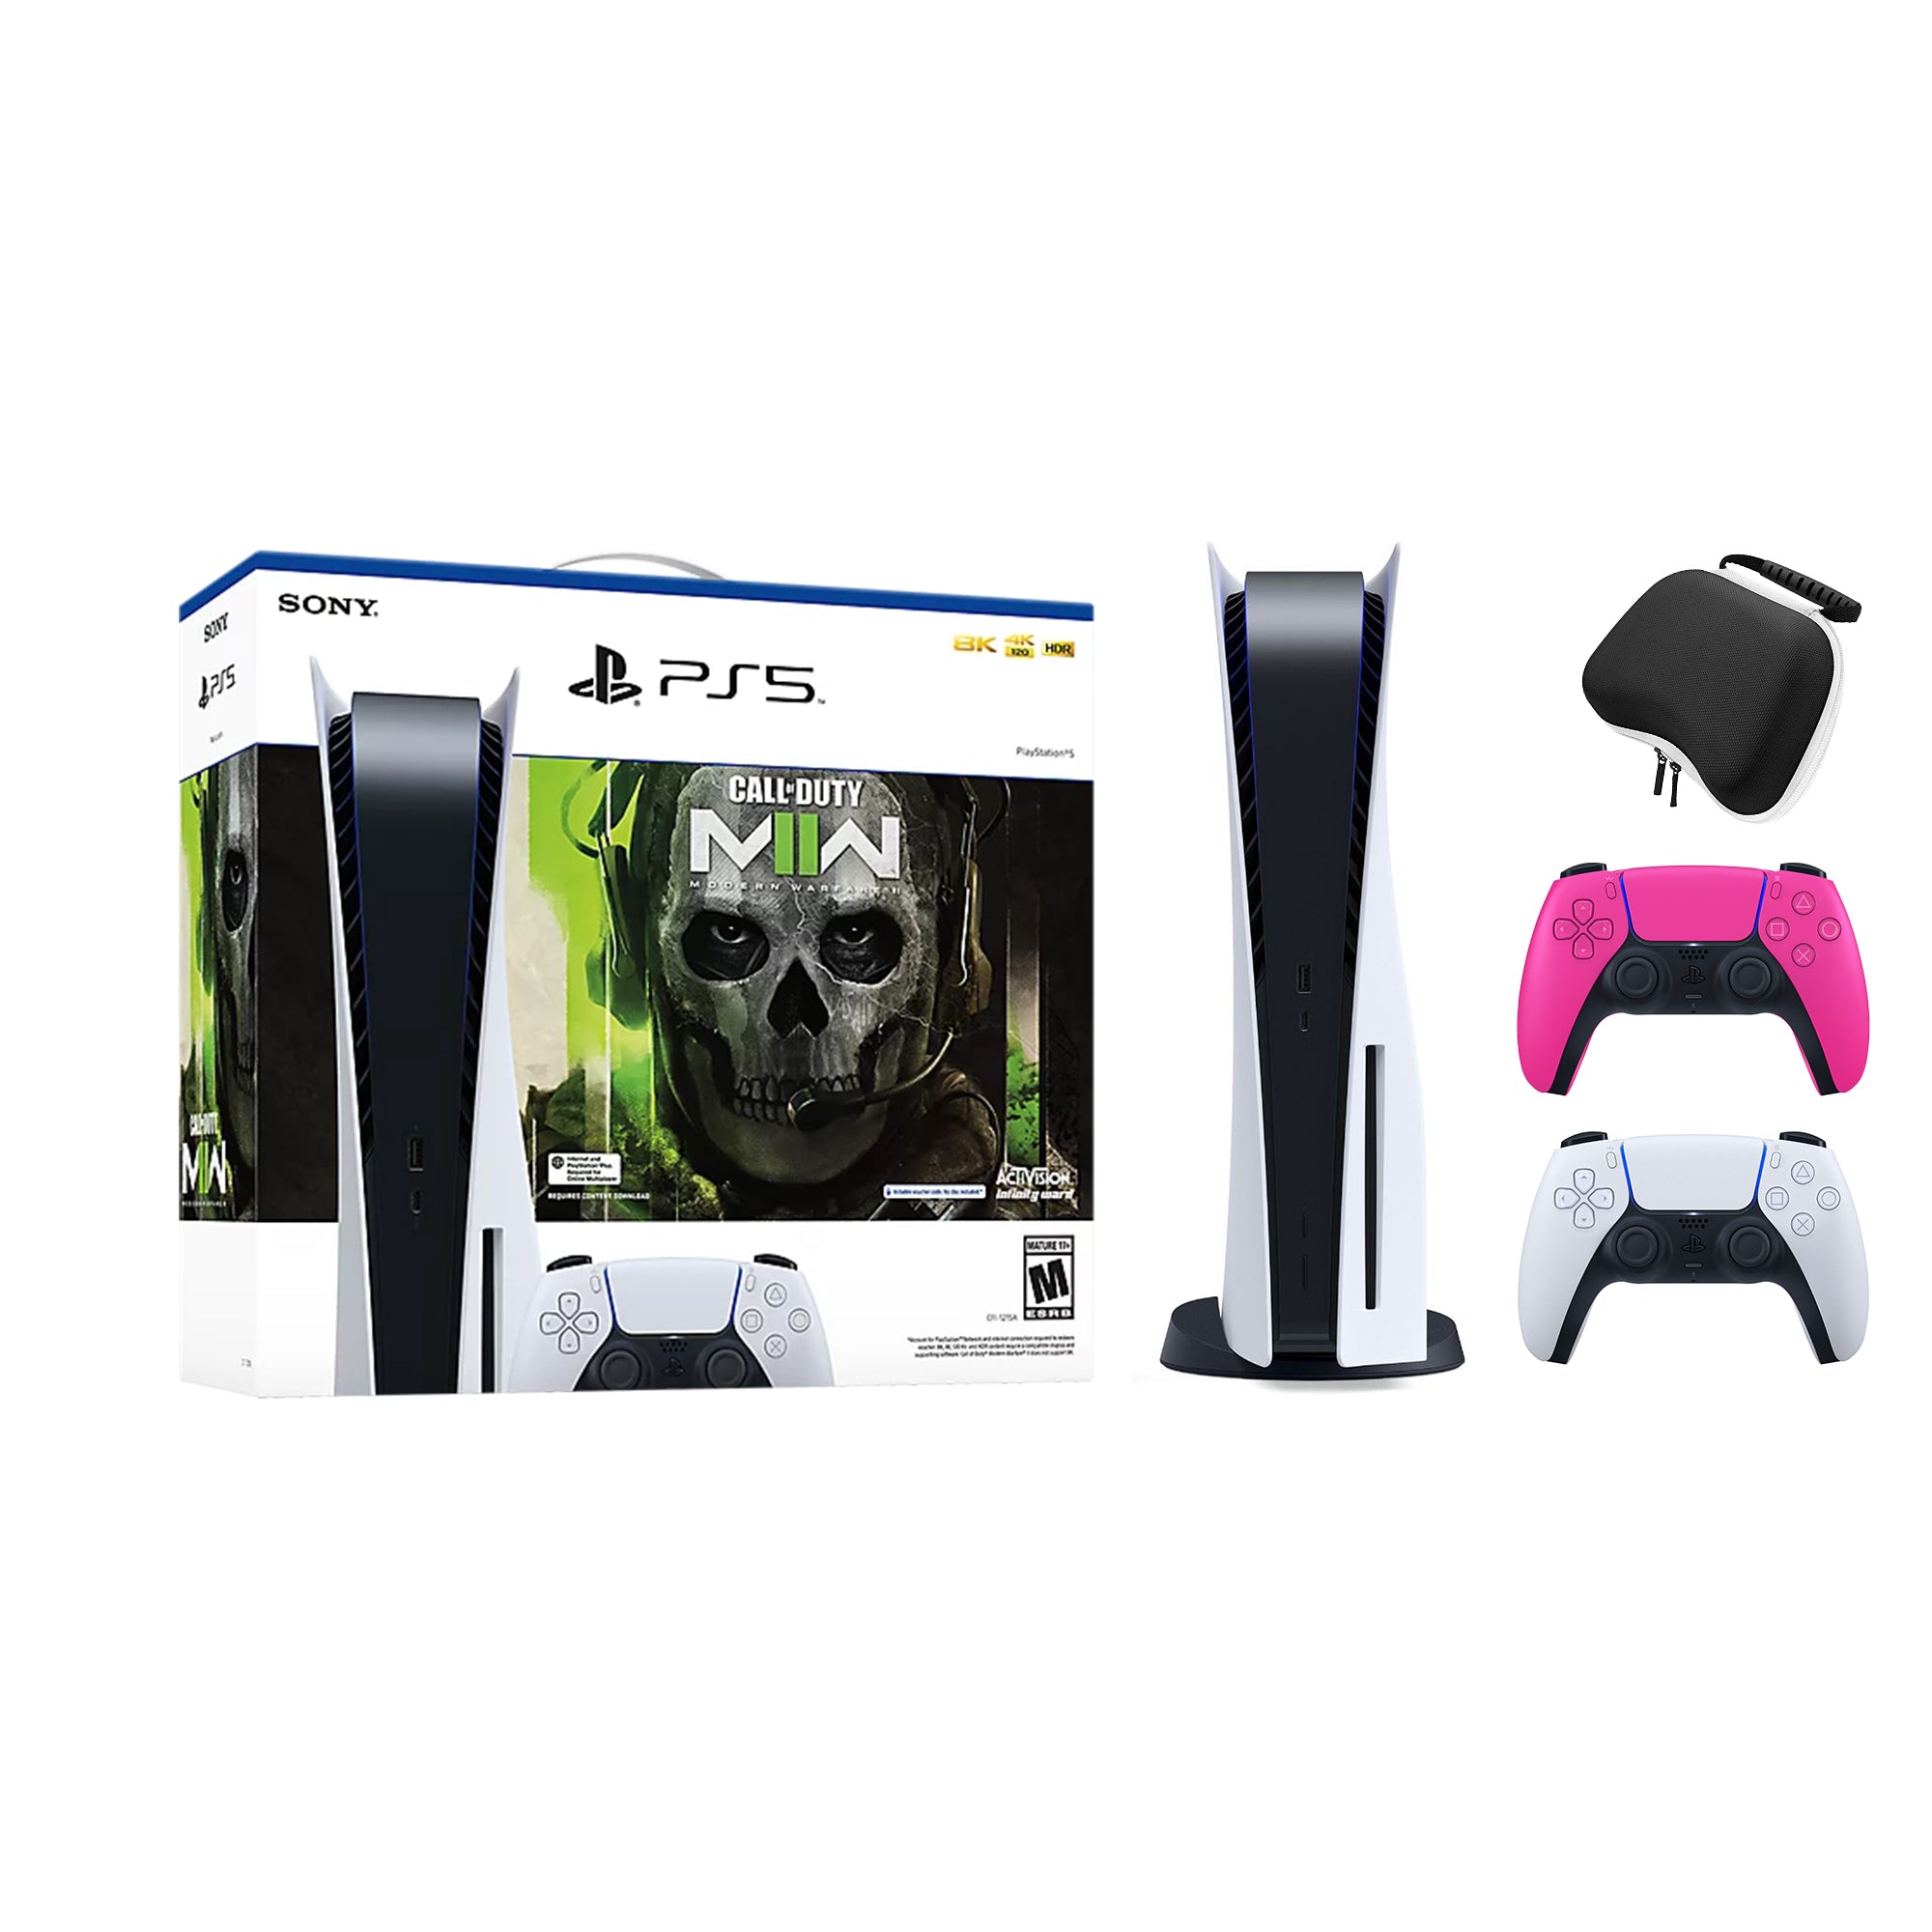 PlayStation 5 Disc Edition Call of Duty Modern Warfare II Bundle with Two Controllers White and Nova Pink DualSense and Mytrix Hard Shell Protective Controller Case